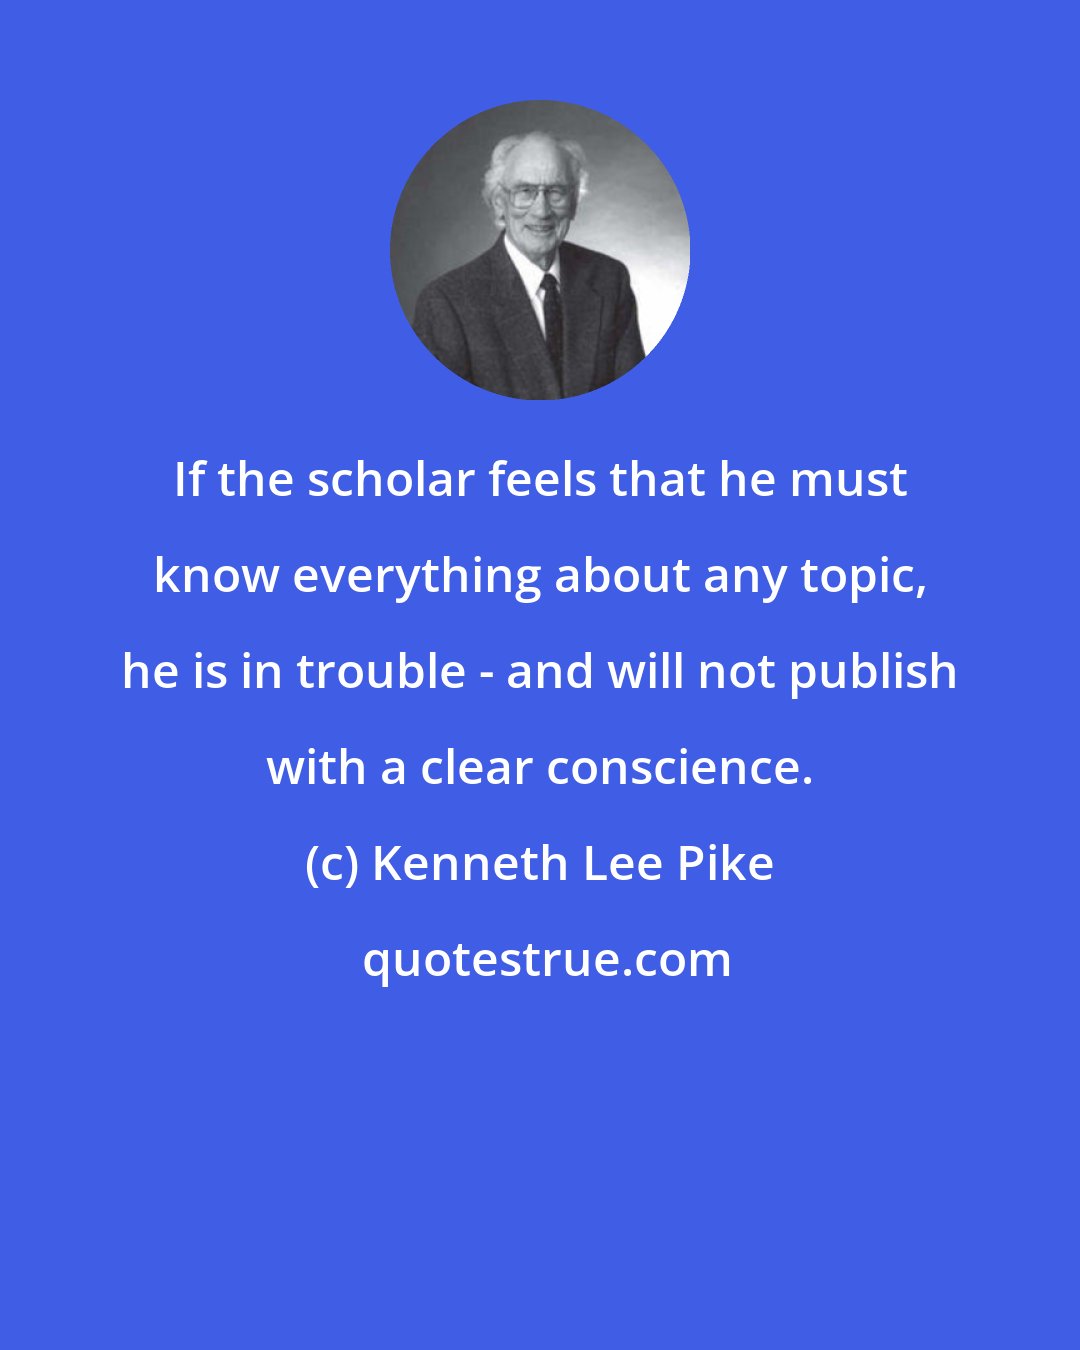 Kenneth Lee Pike: If the scholar feels that he must know everything about any topic, he is in trouble - and will not publish with a clear conscience.